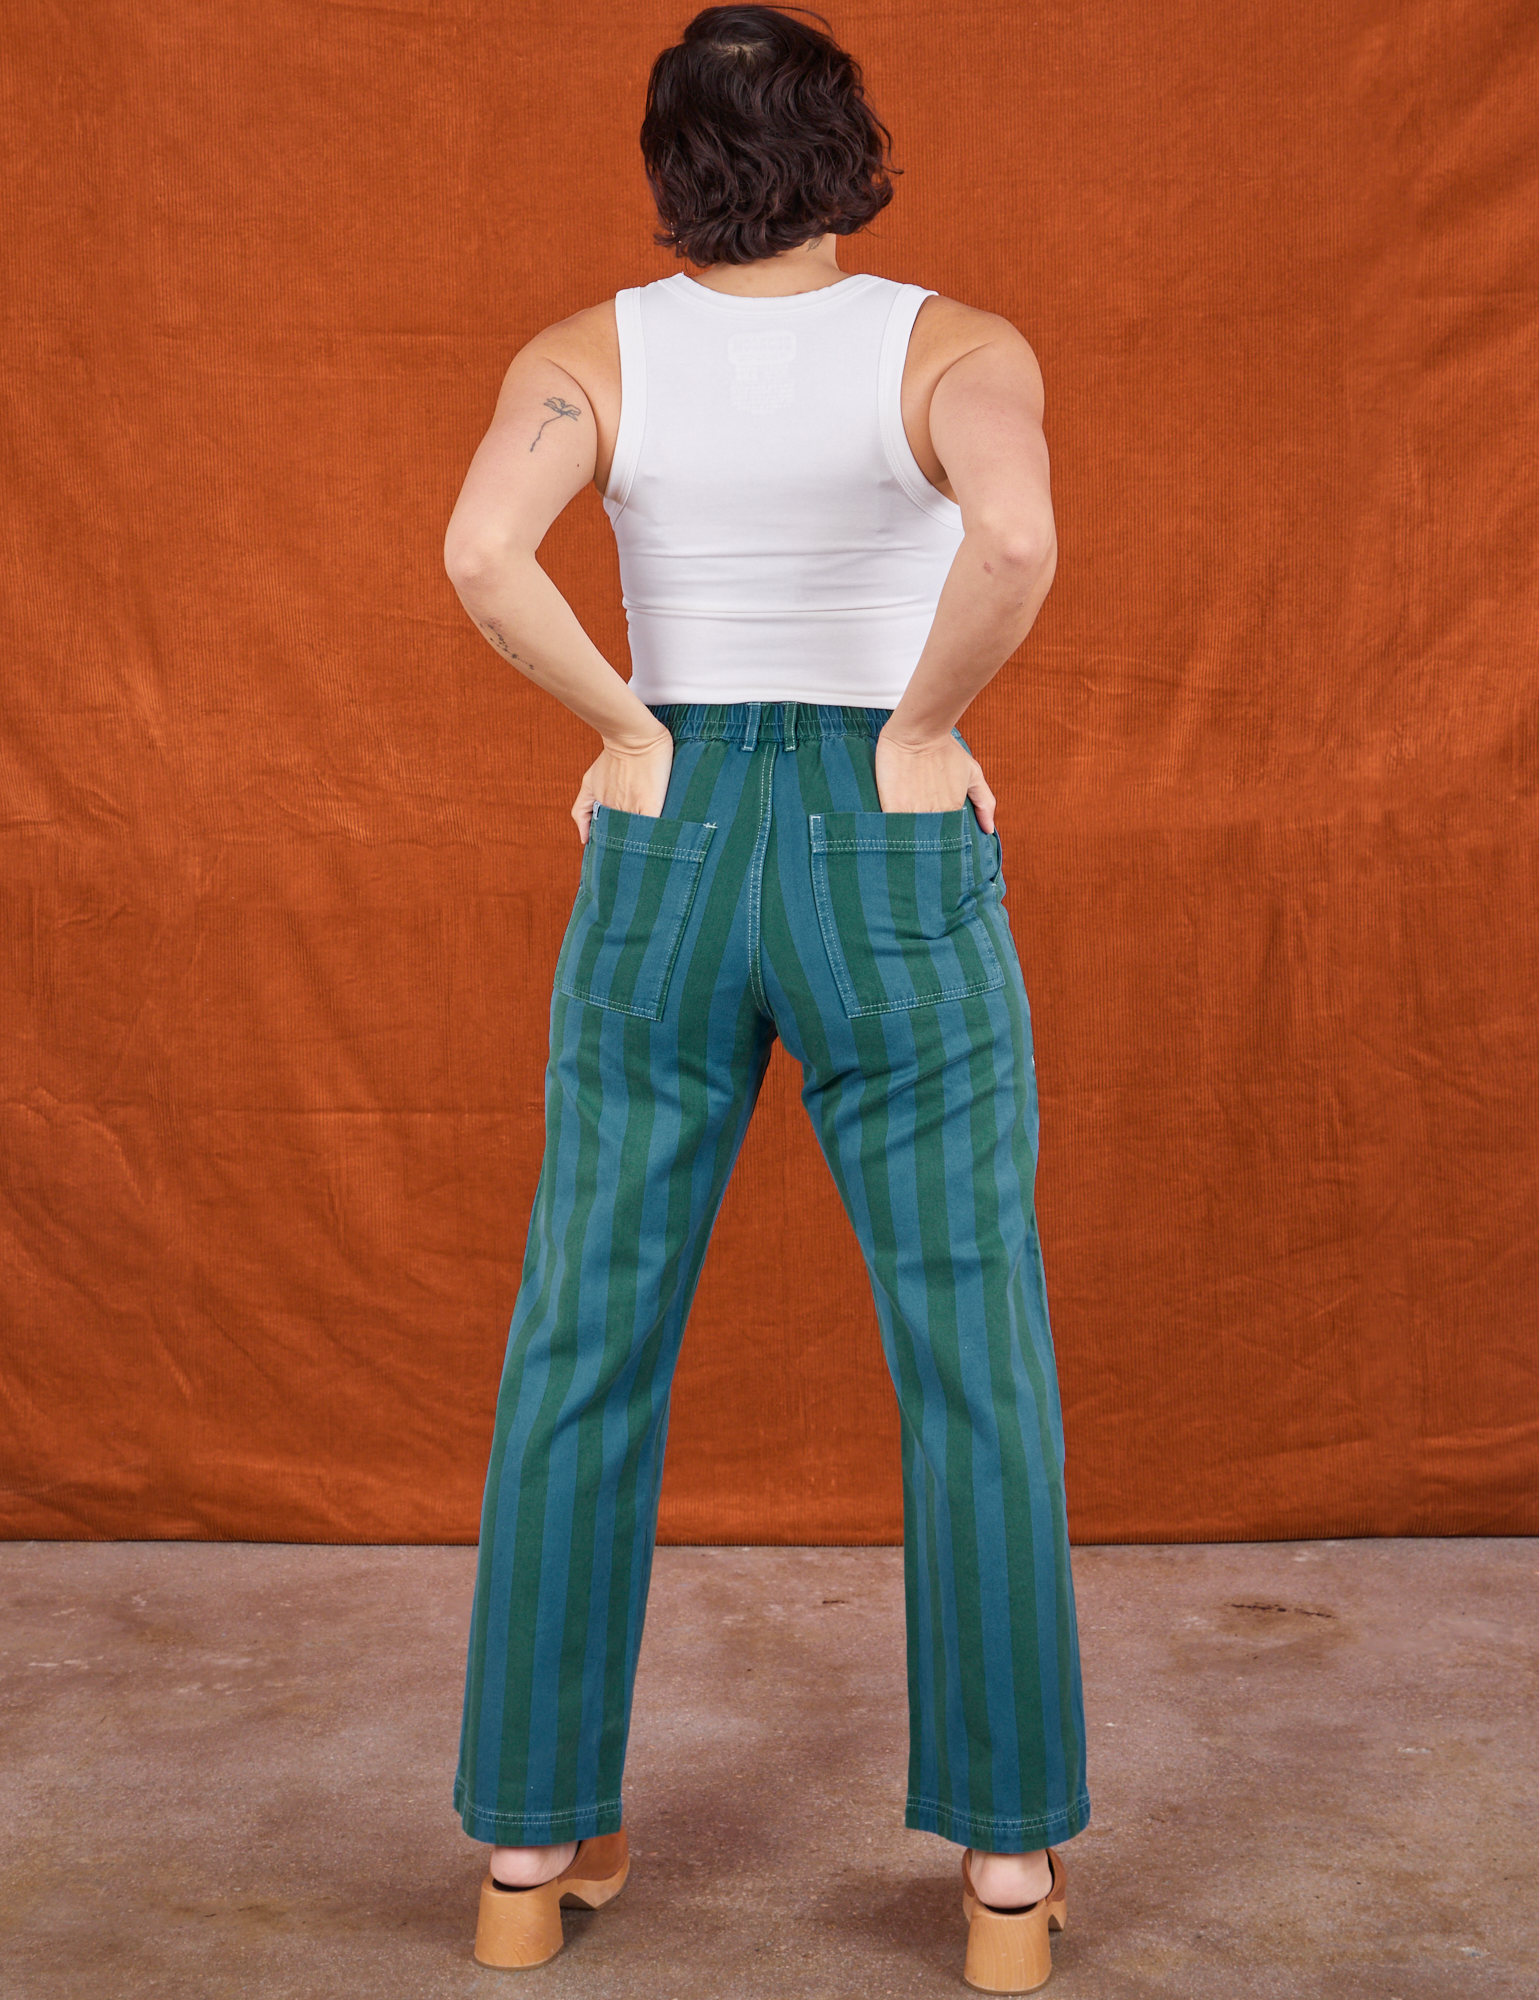 Back view of Overdye Stripe Work Pants in Blue/Green and vintage off-white Cropped Tank Top on Tiara